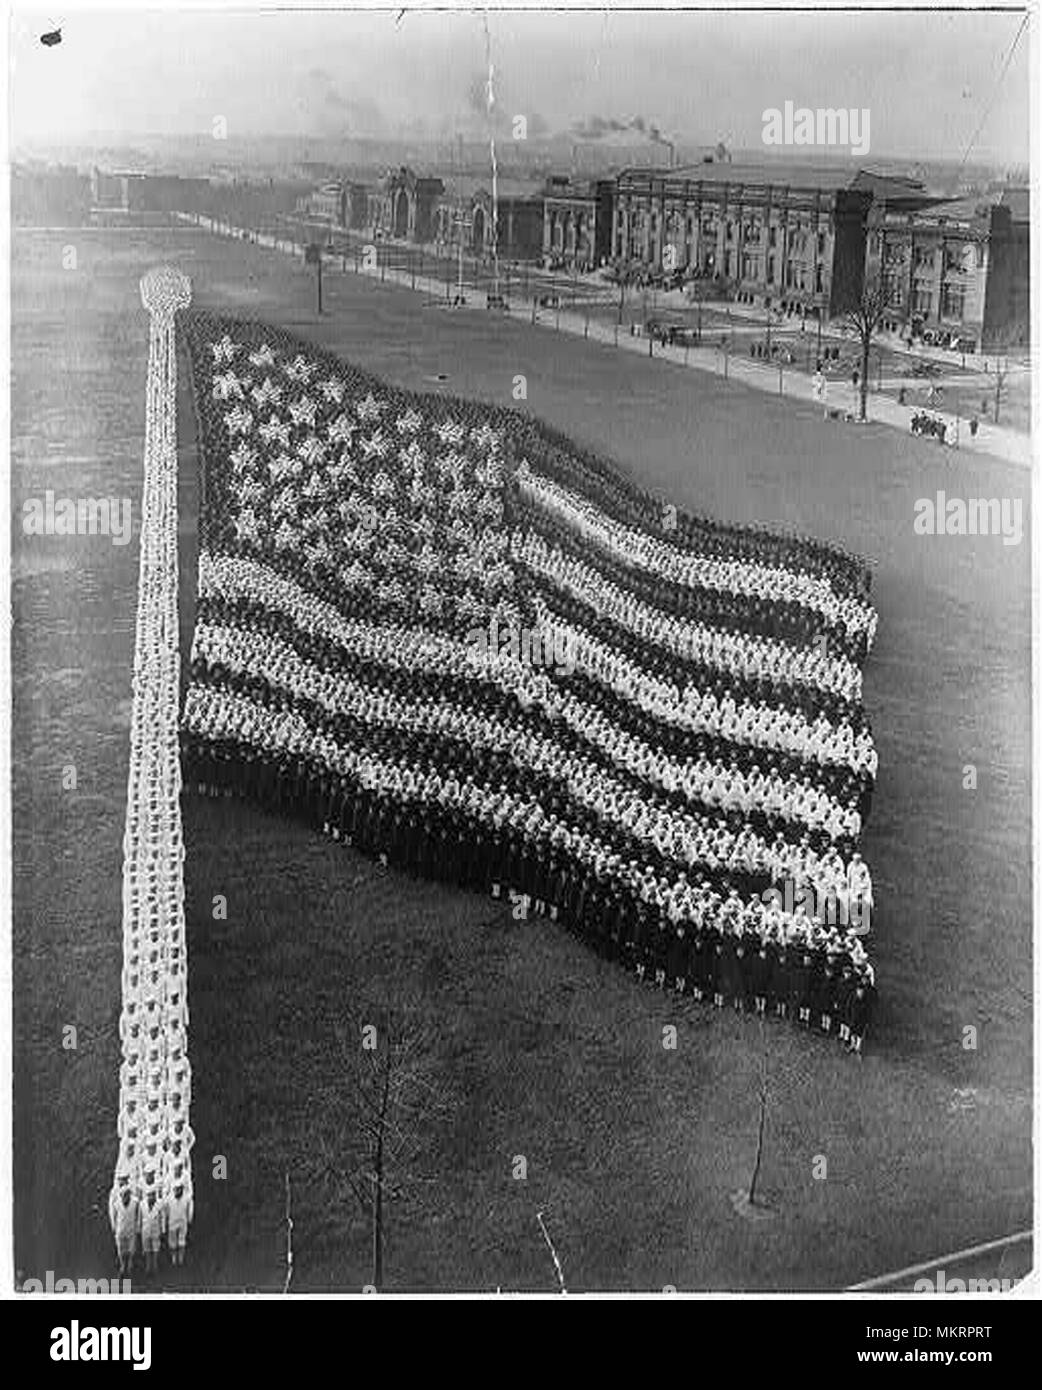 a patriotic american image made up of people standing in a crowd Stock Photo